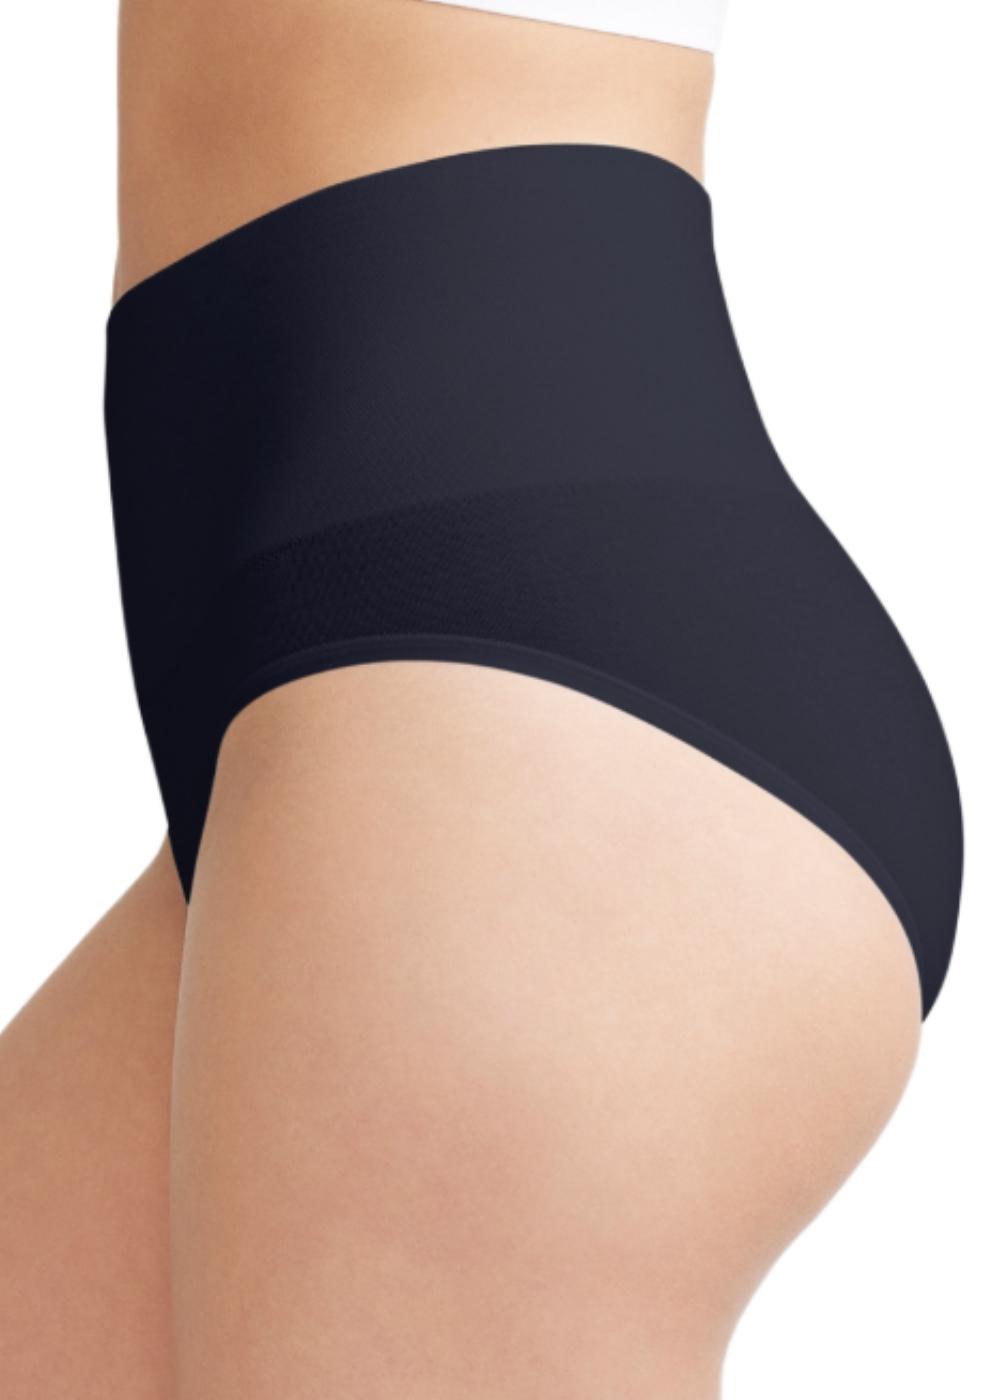 Joy Cotton Shaping Brief - Seamless from Yummie in Black  - 1